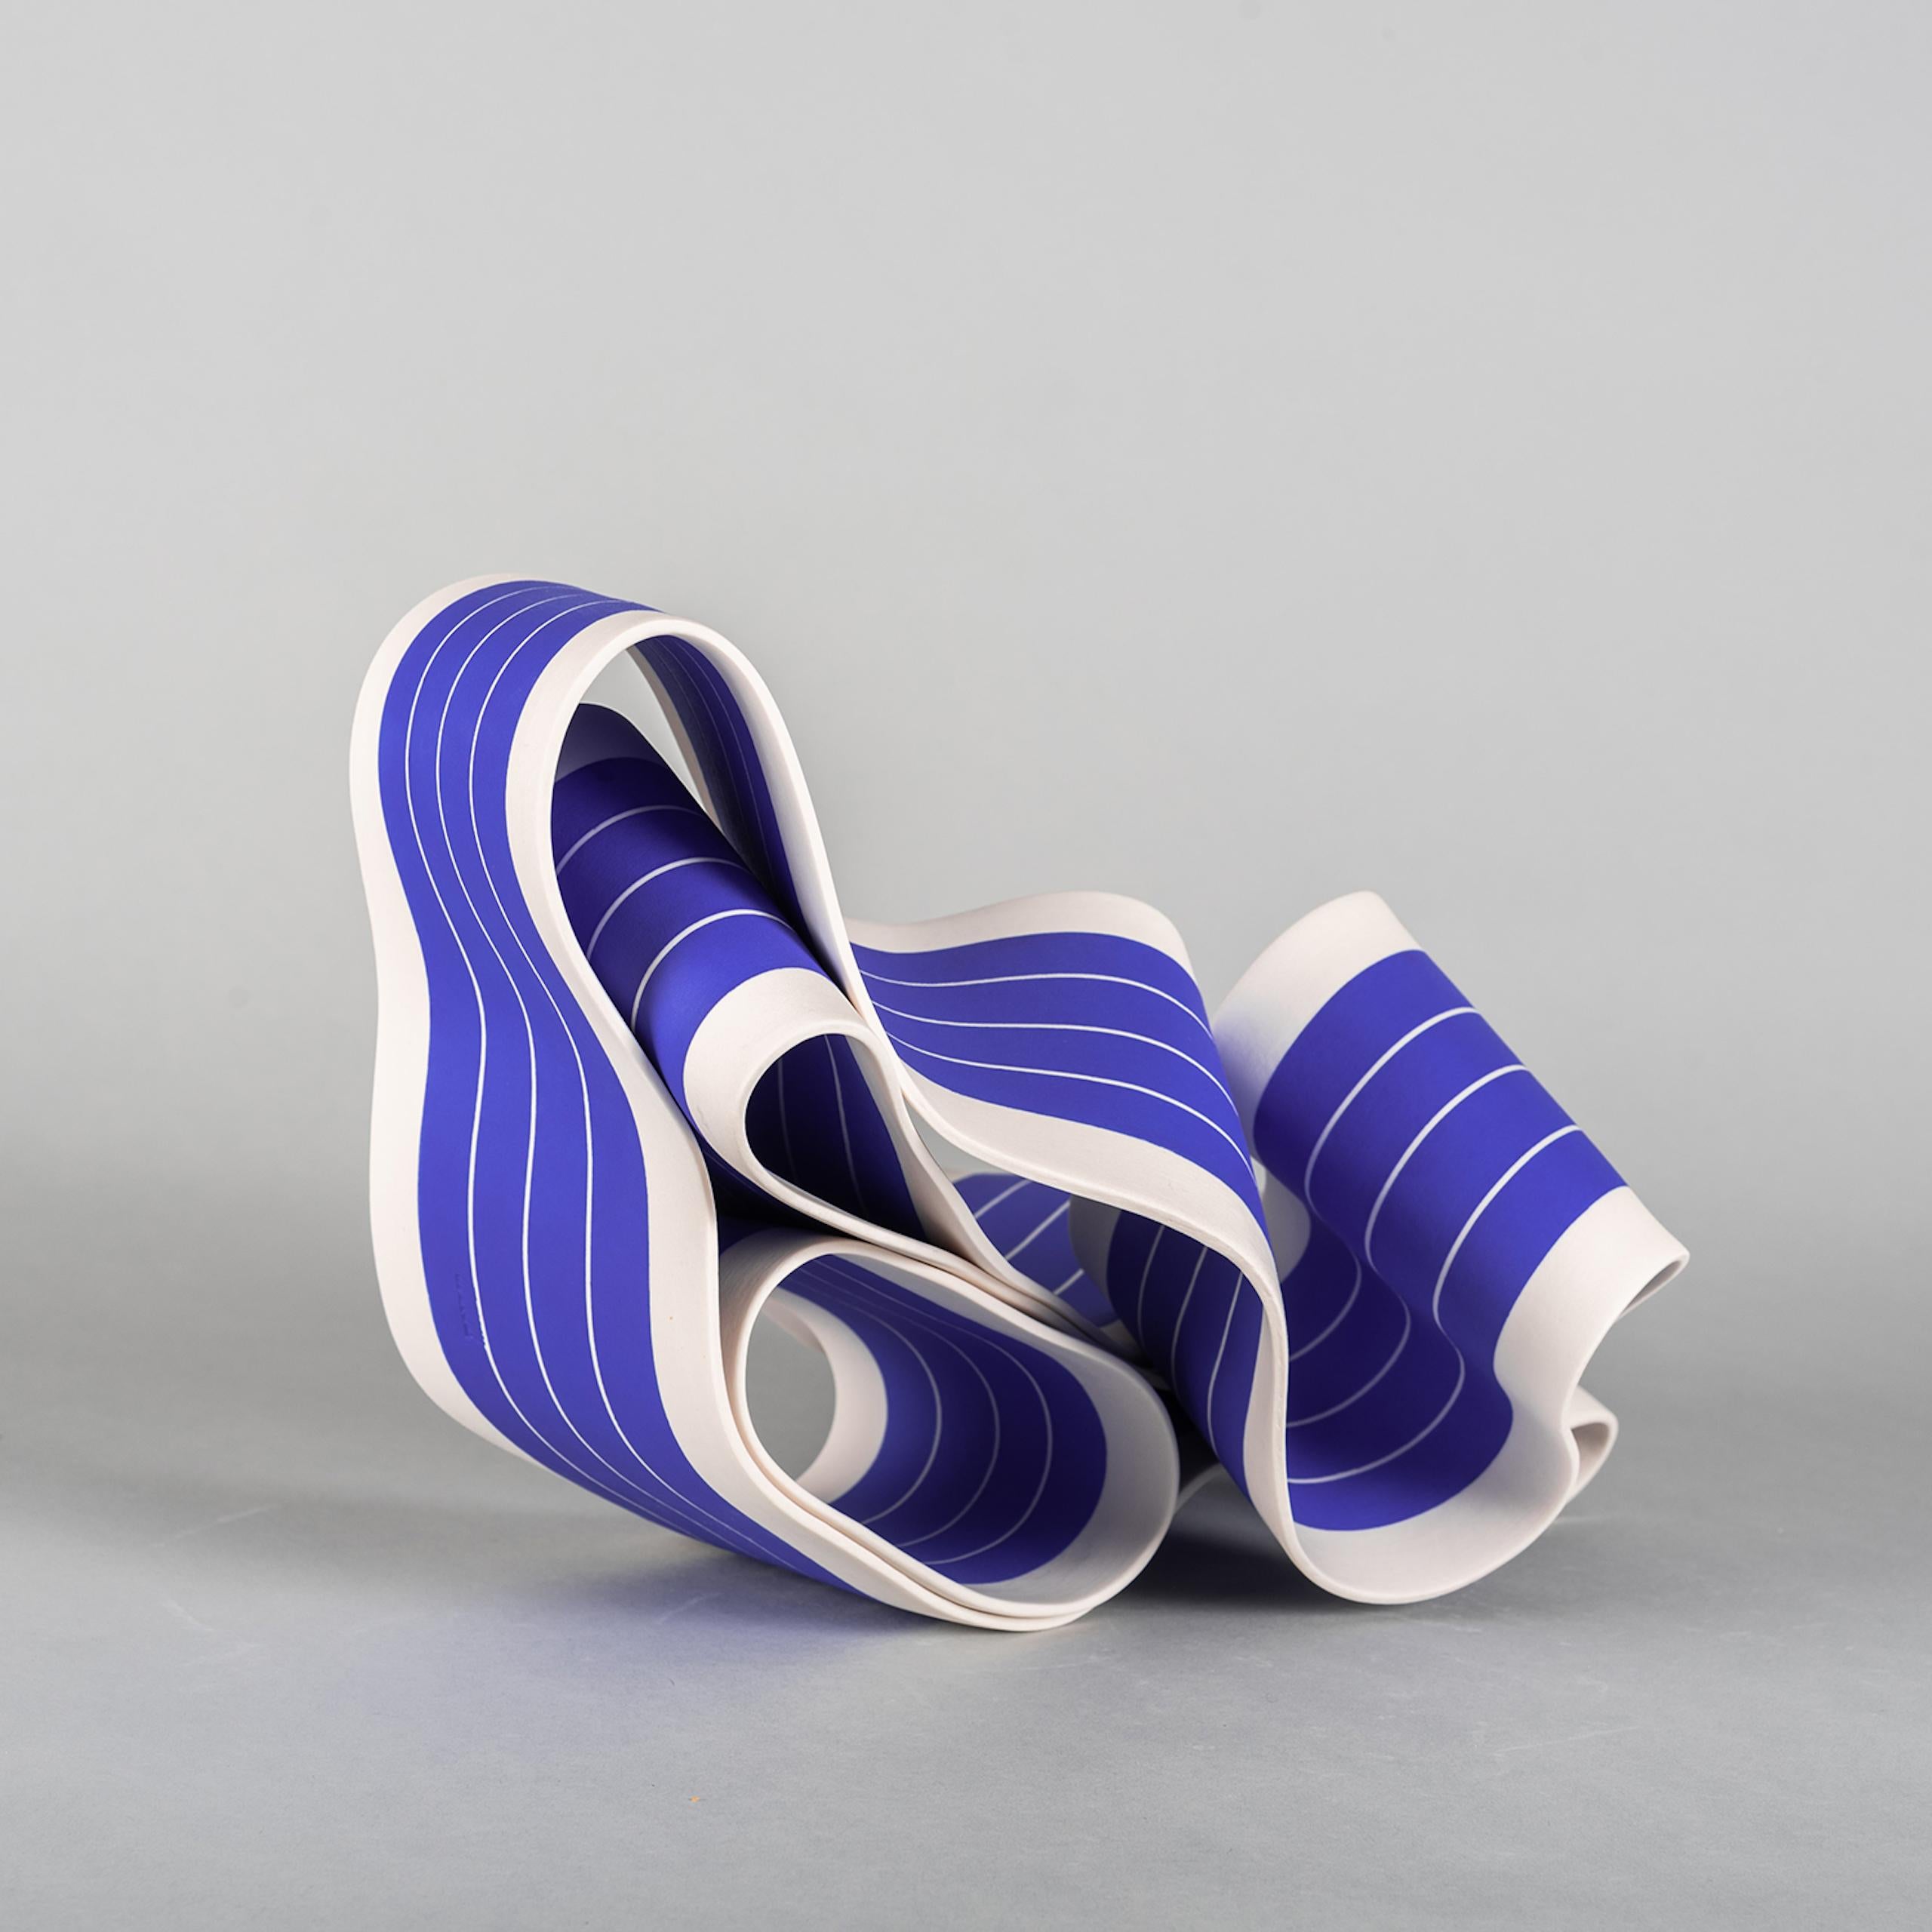 This sculpture is part of the sculptor’s most recent work, in which she uses paper porcelain (porcelain with 0.5% paper fibre added for greater flexibility) to create organic, dynamic and natural shapes. The artist tests the physical limits of the